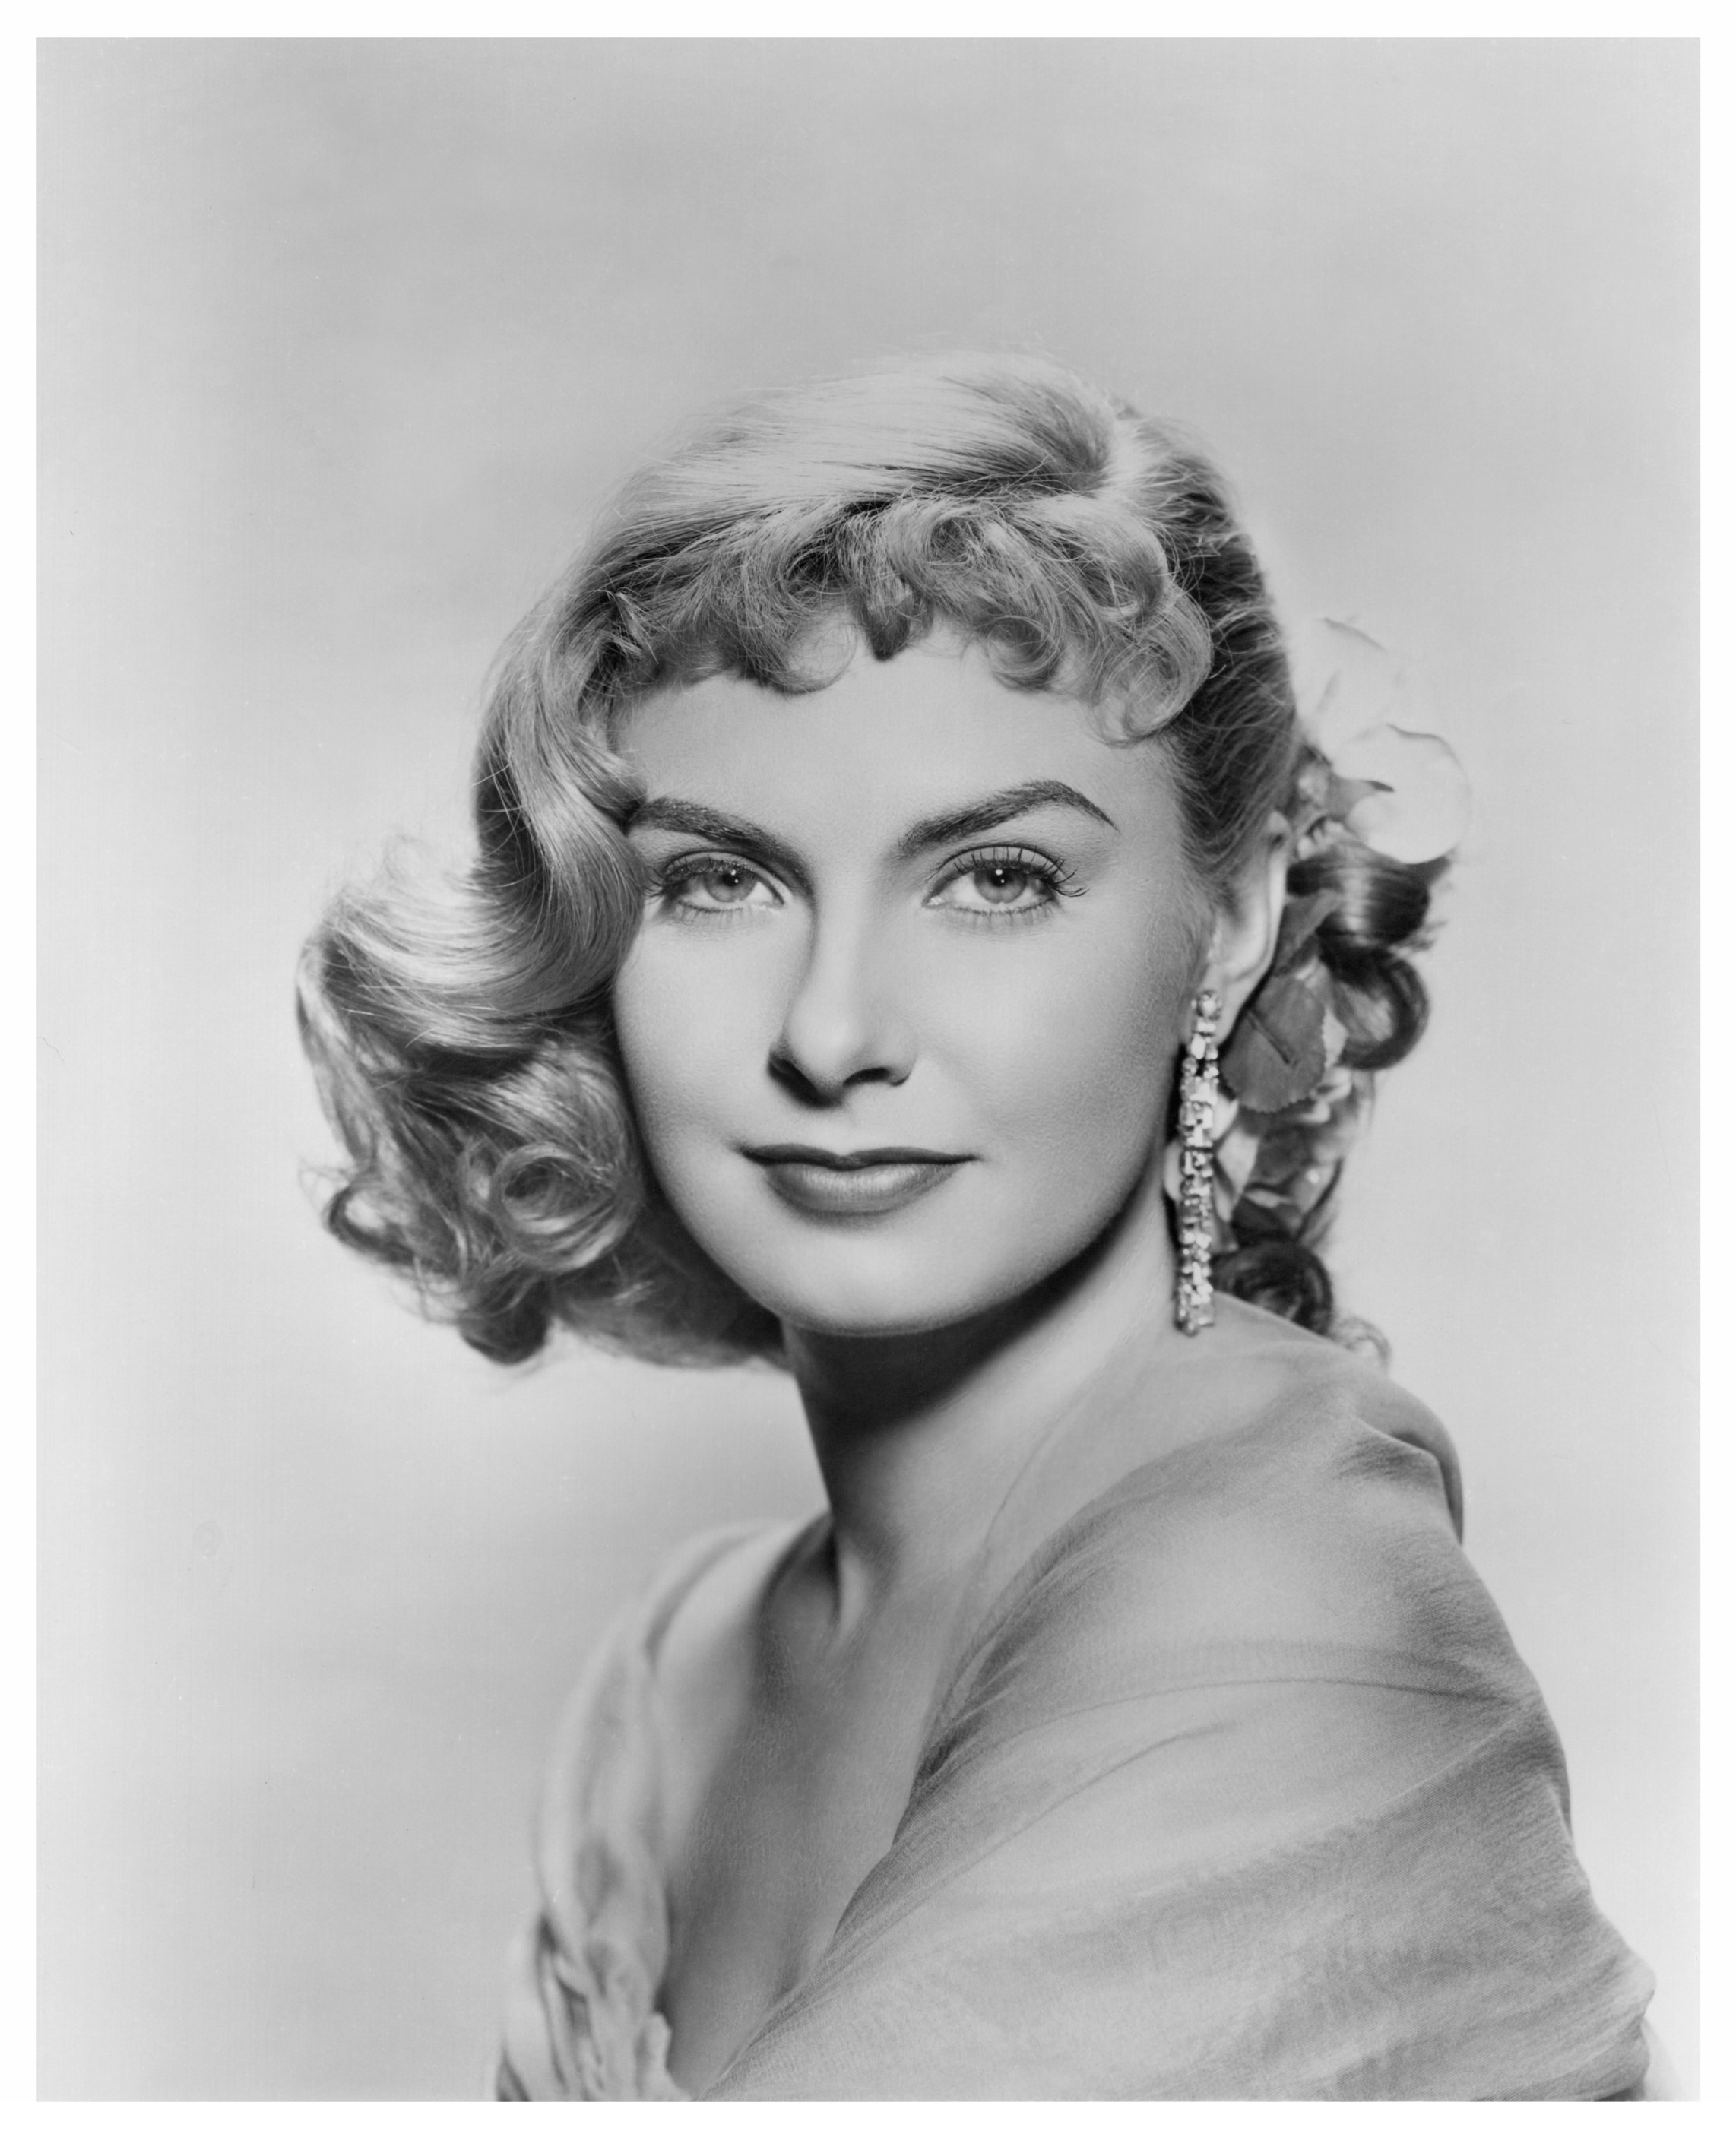 Joanne Woodward as 'Eve White/Eve Black/Jane' in a publicity shot for the movie “The Three Faces of Eve” in 1957 | Source: Getty Images